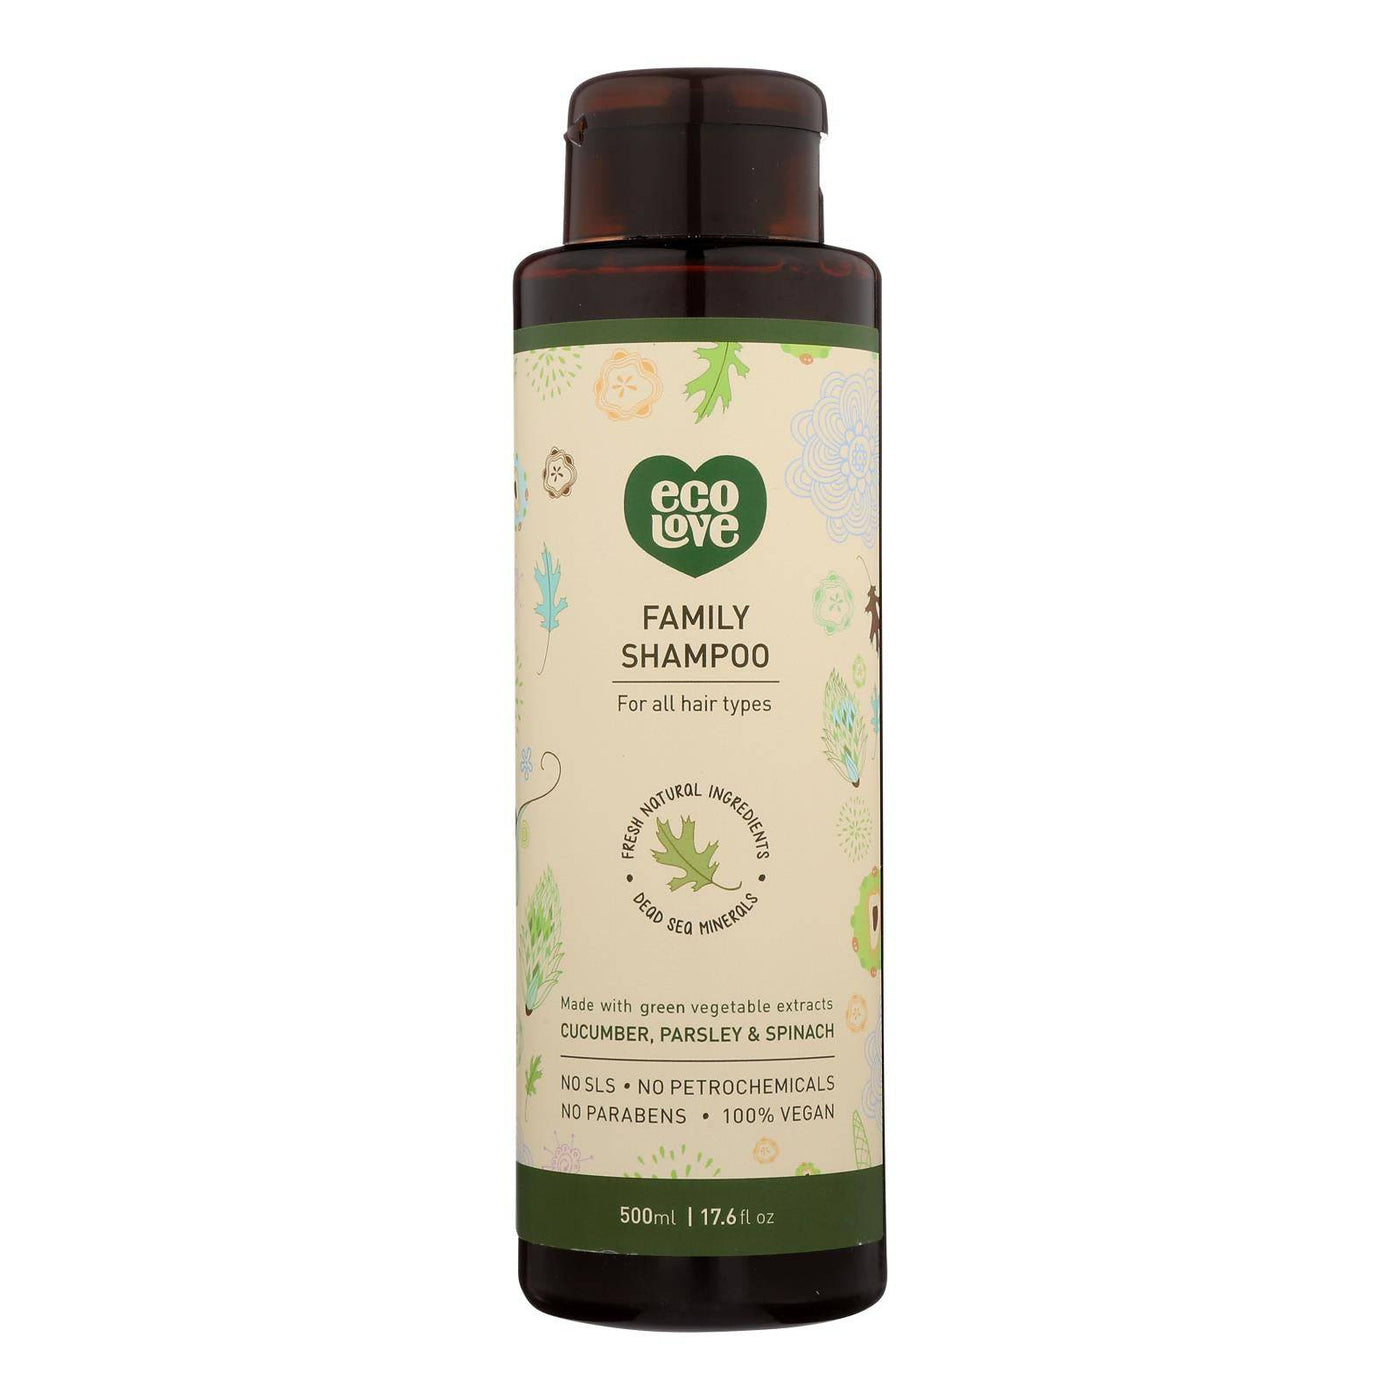 Buy Ecolove Shampoo - Green Vegetables Family Shampoo For All Hair Types - Case Of 1 - 17.6 Fl Oz.  at OnlyNaturals.us